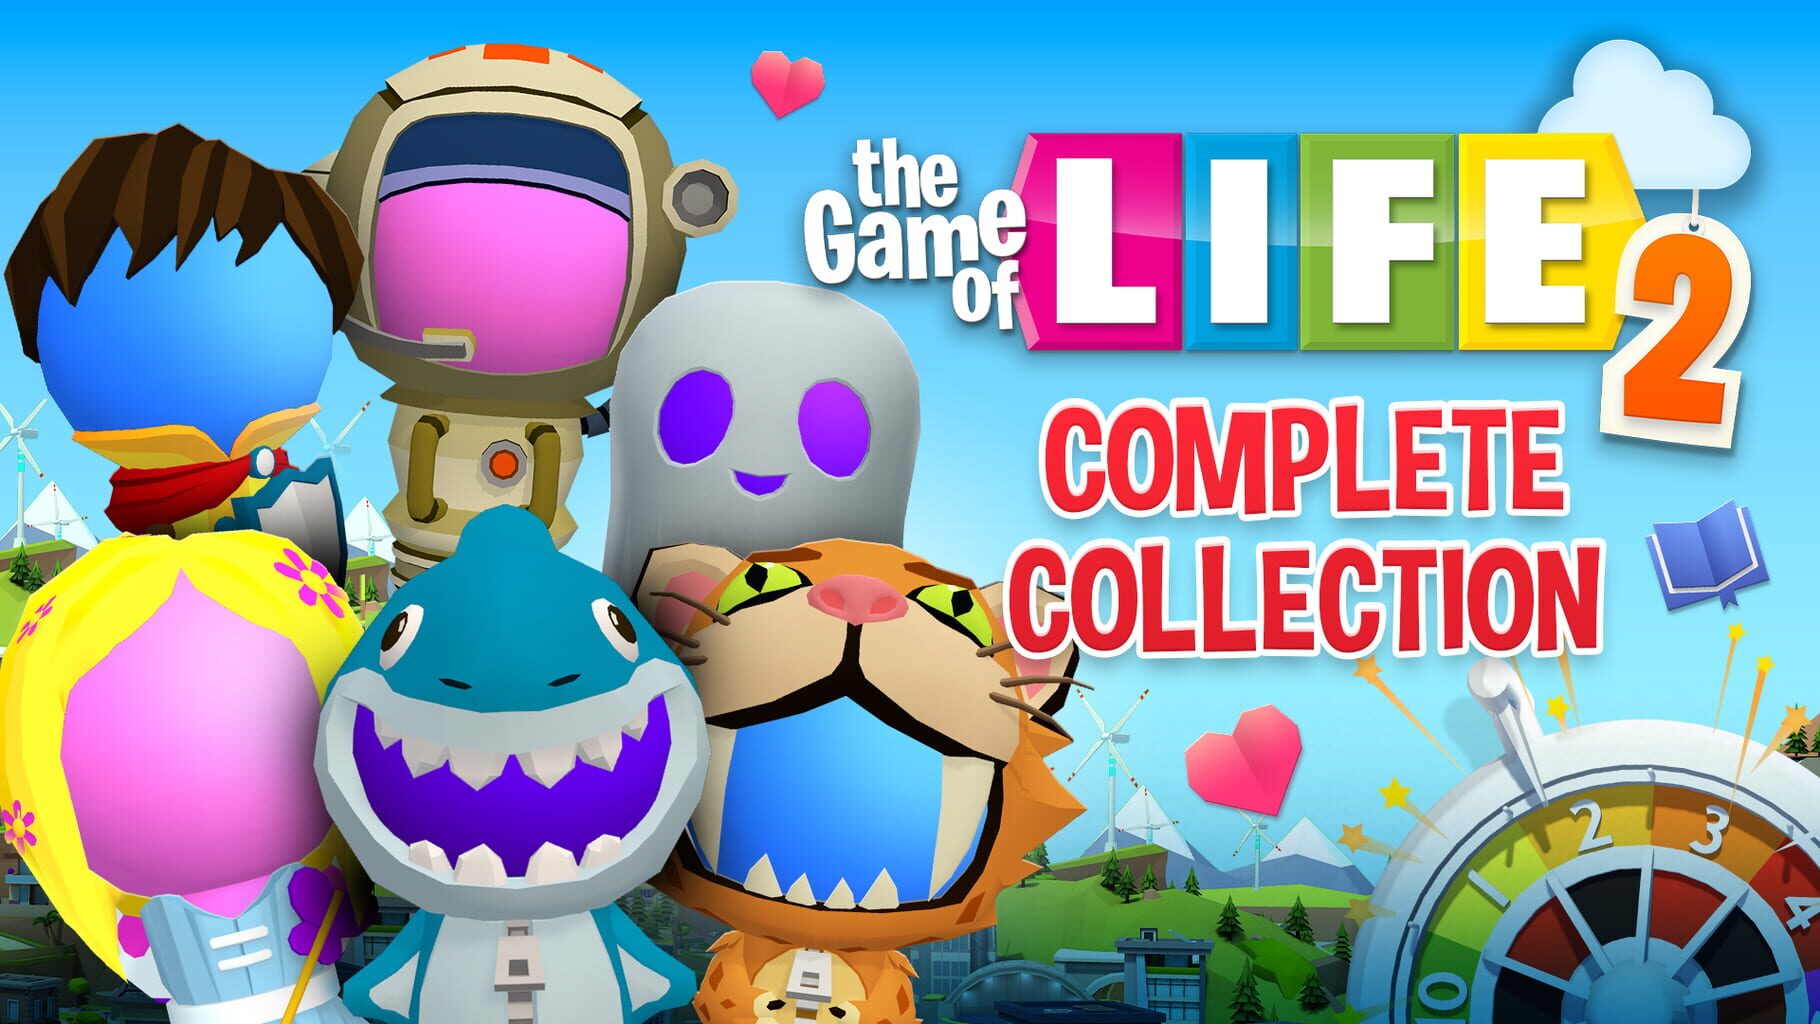 The Game of Life 2: Complete Collection artwork